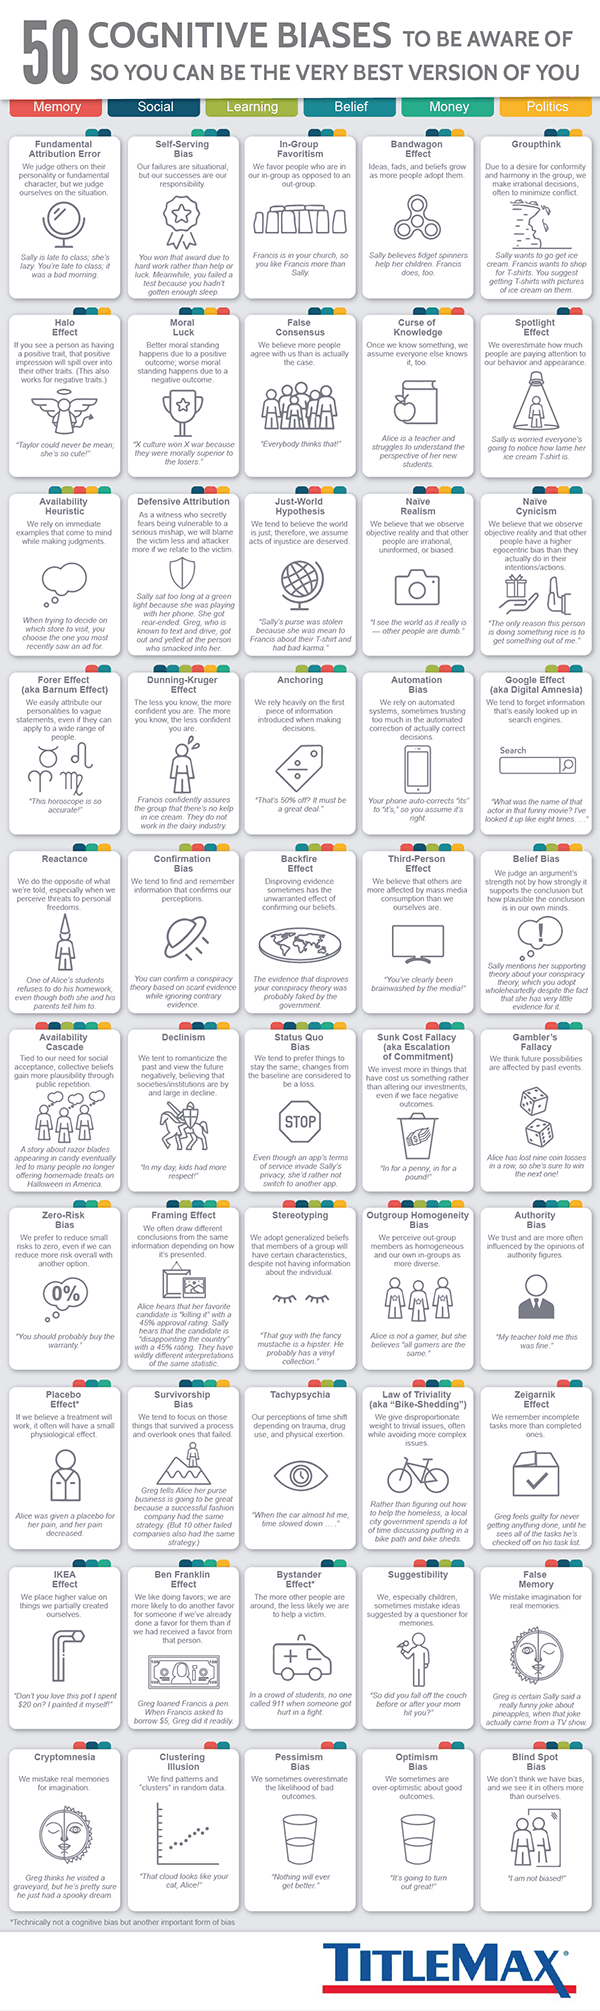 50 Cognitive Biases to be Aware of so You Can be the Very Best Version of You